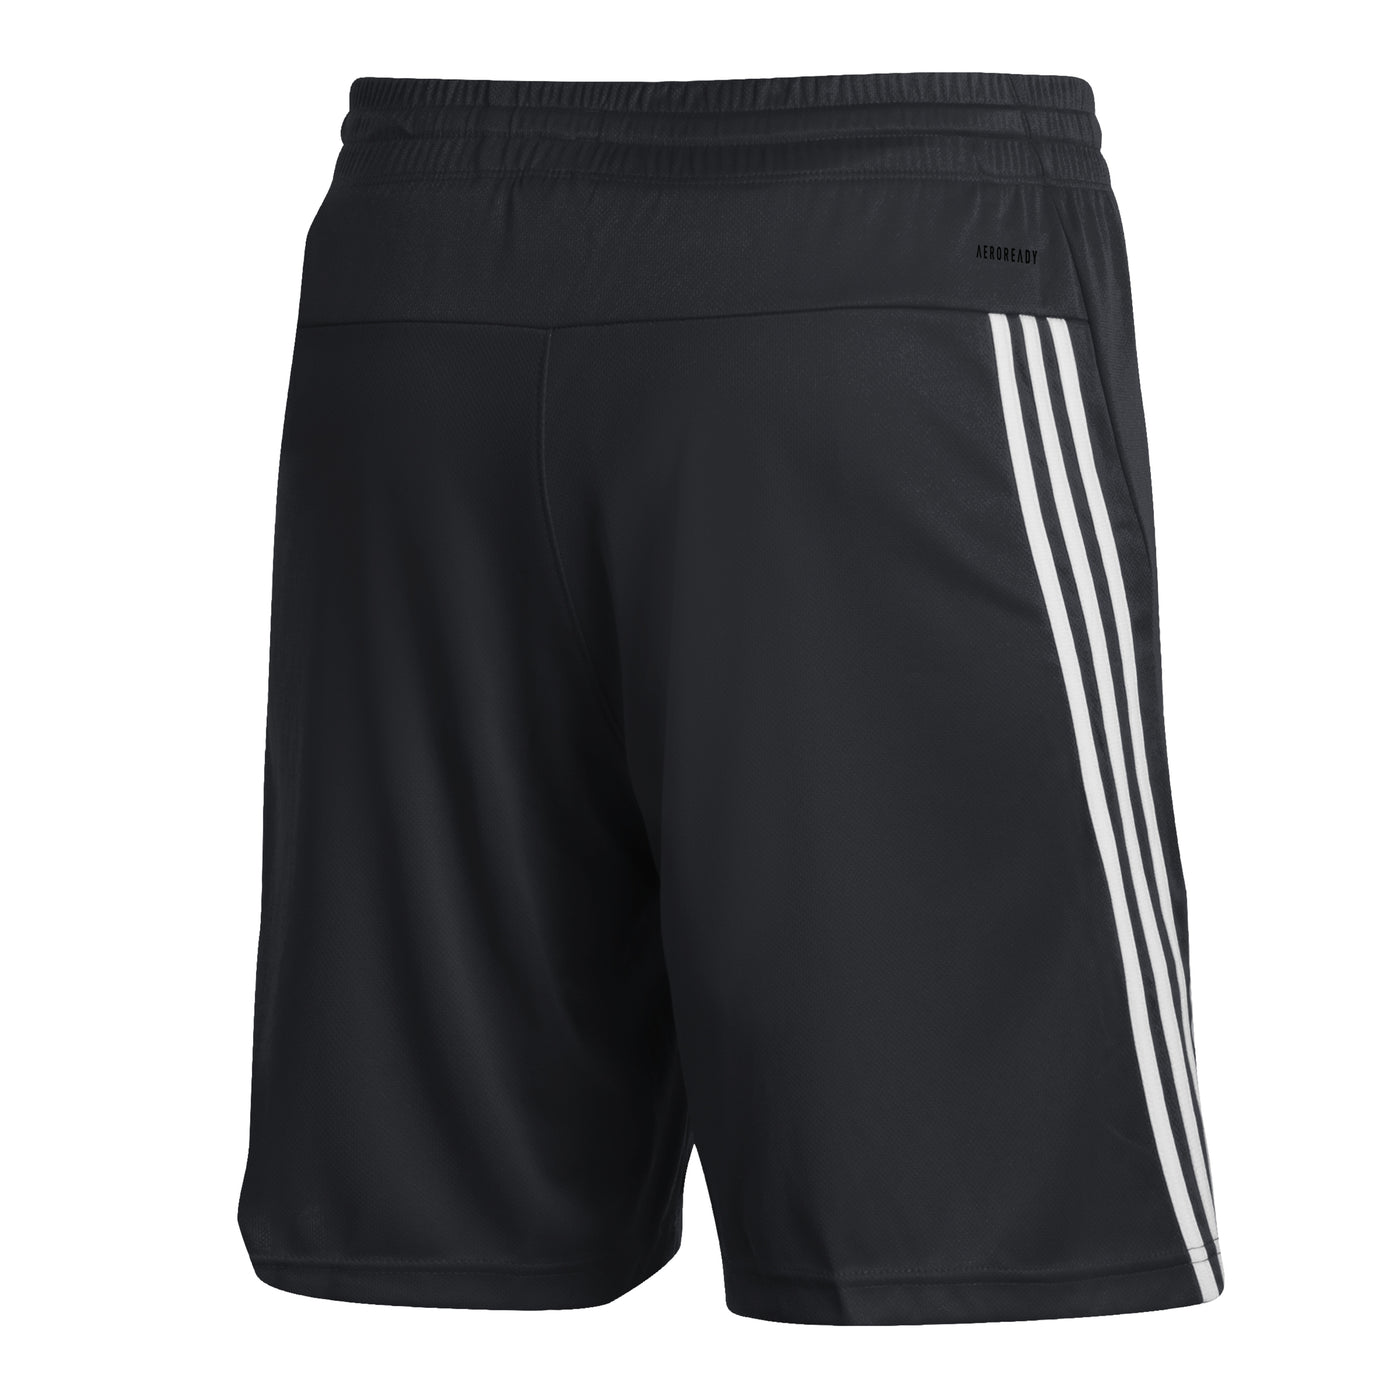 Back view of black shorts with 3 white stripes on left leg